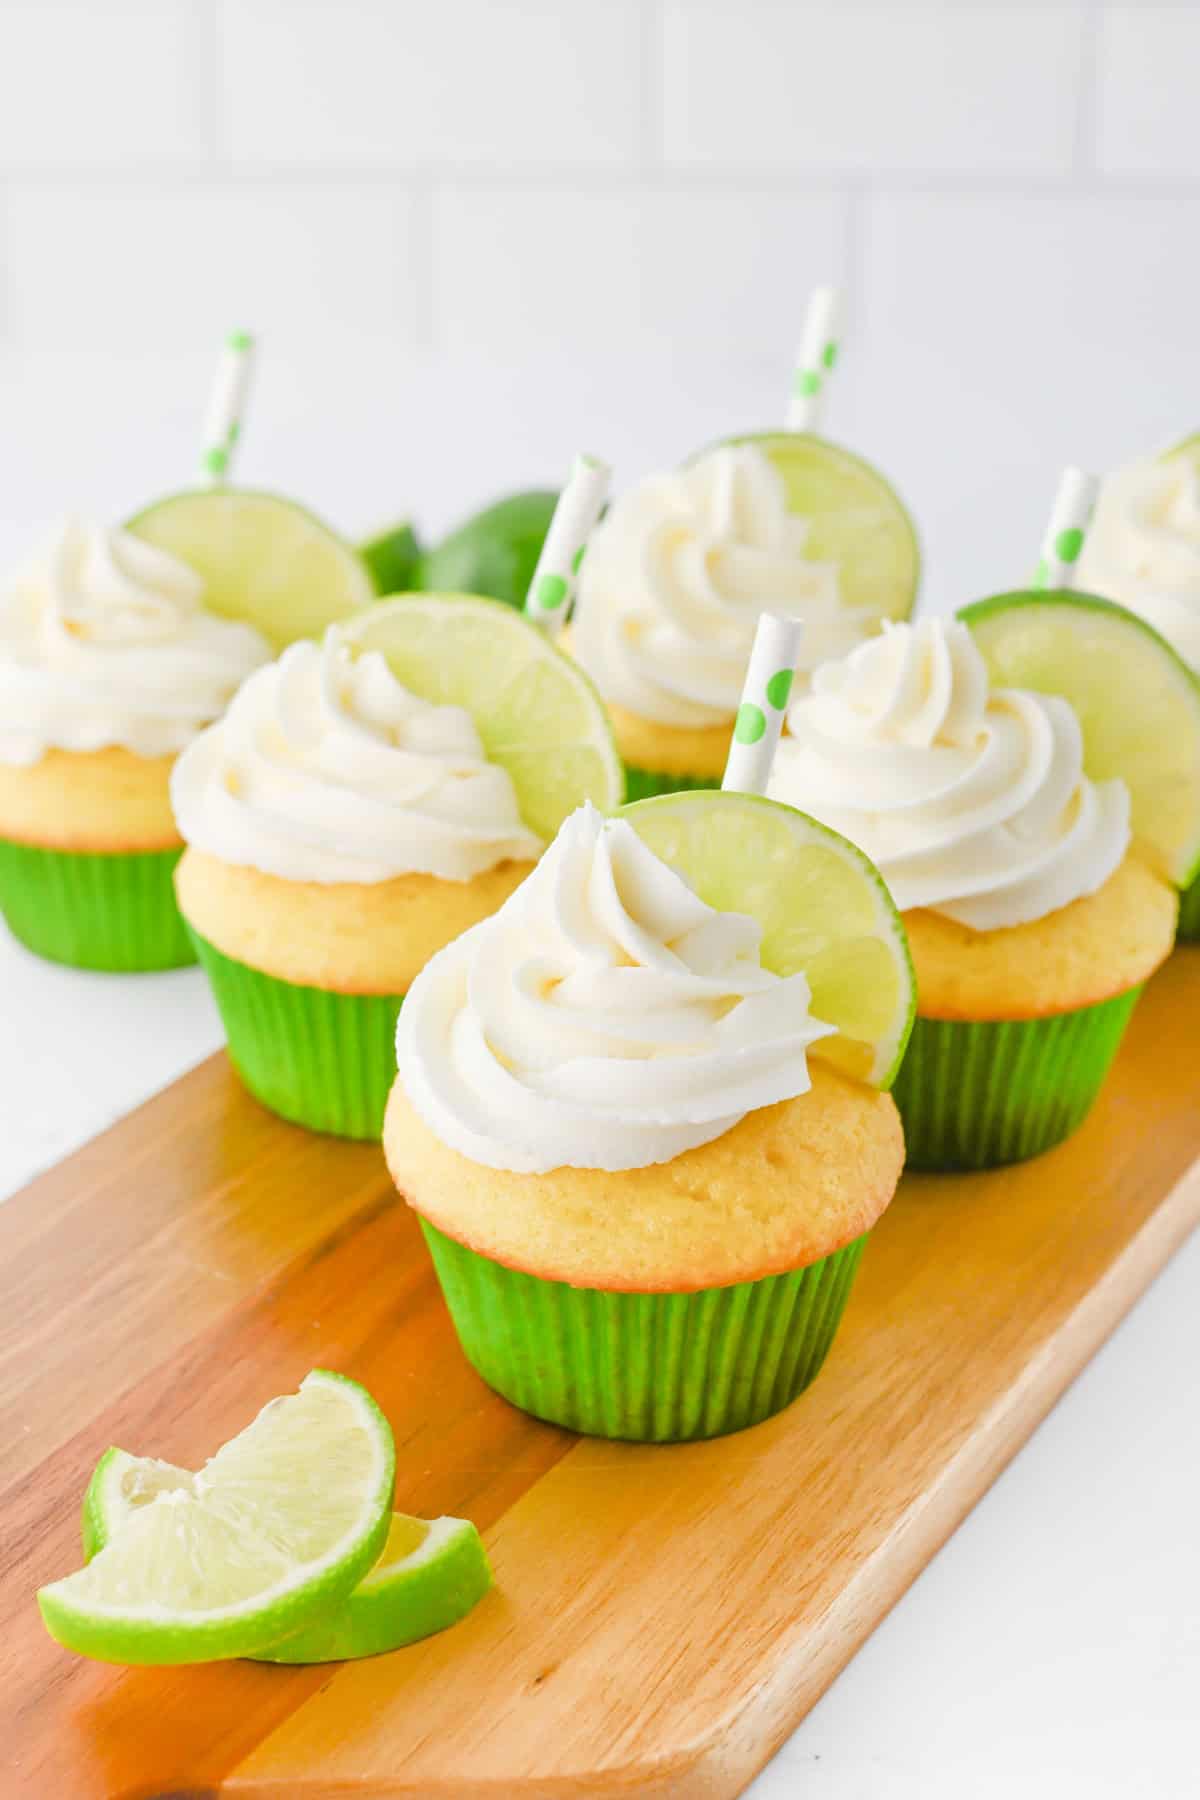 Tequila Cupcakes with limes and straws.